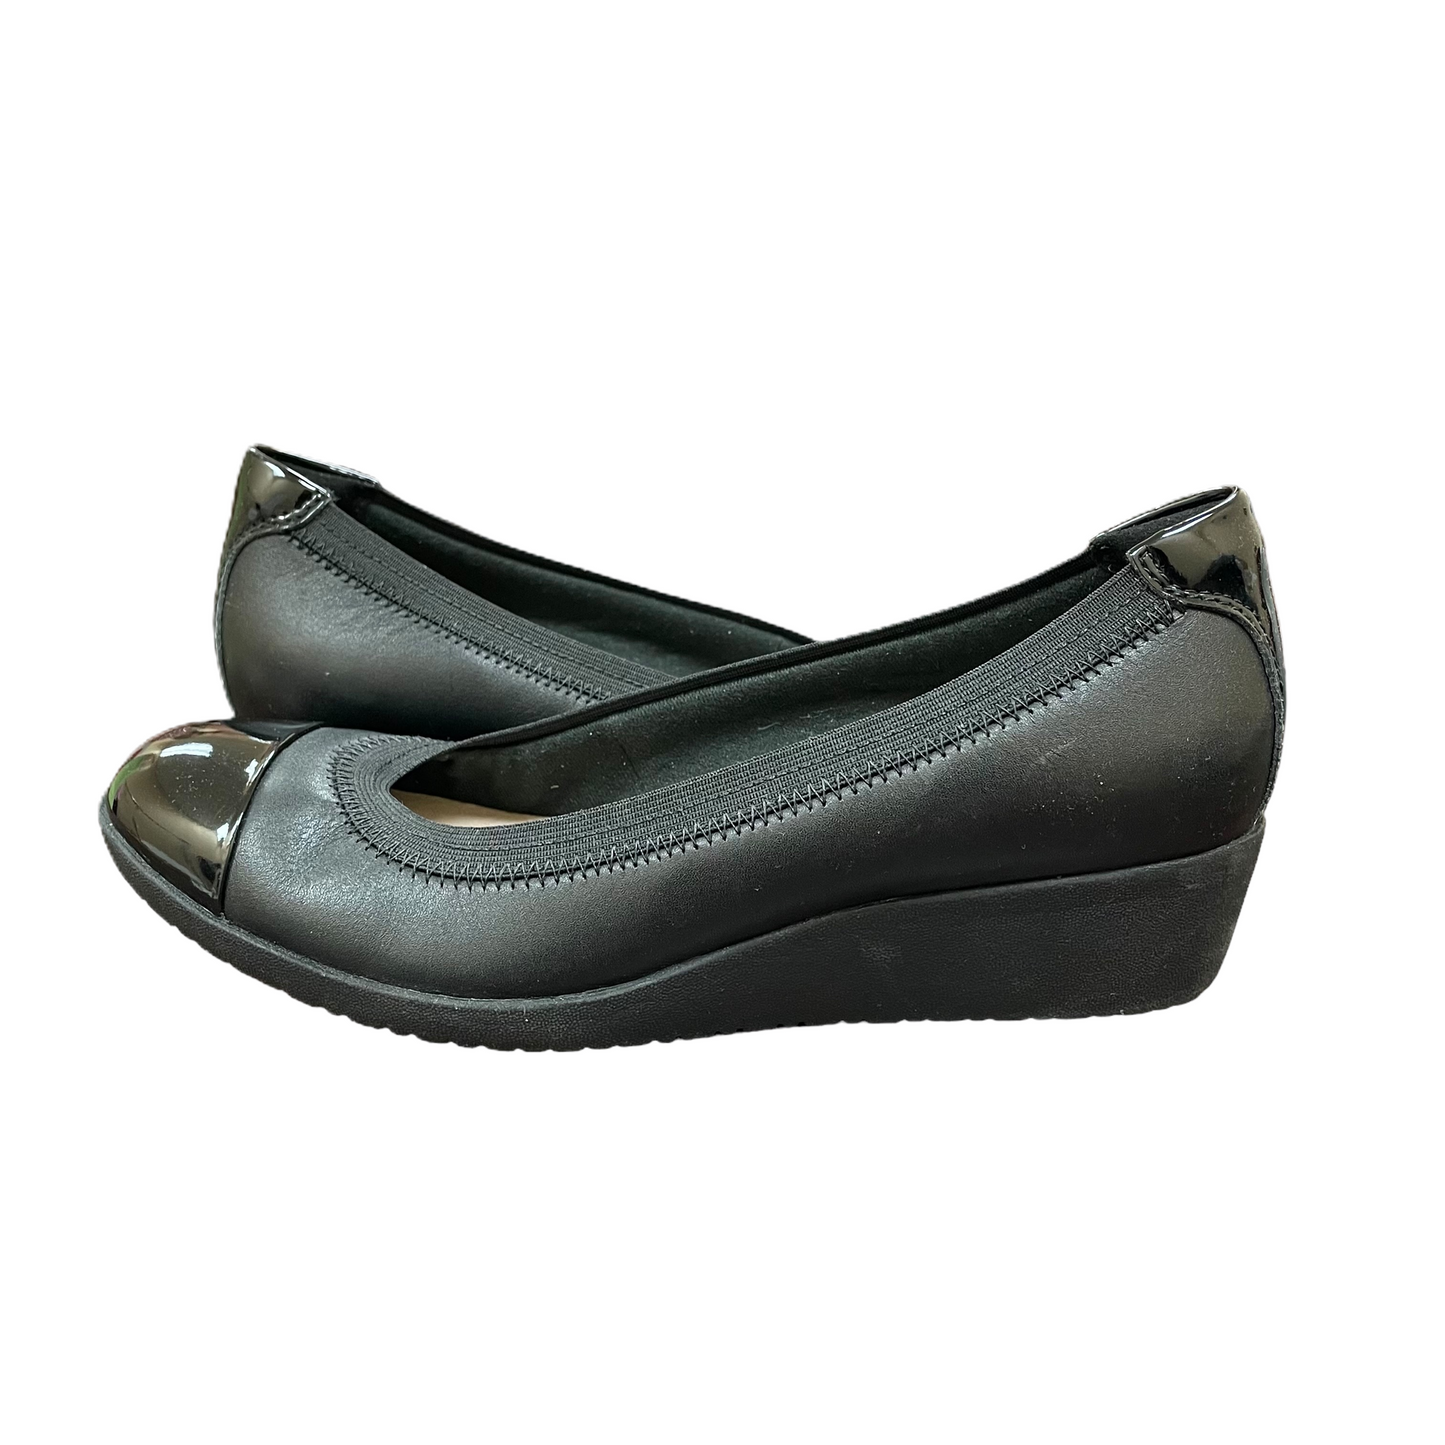 Black Shoes Heels Wedge By Clarks, Size: 7.5